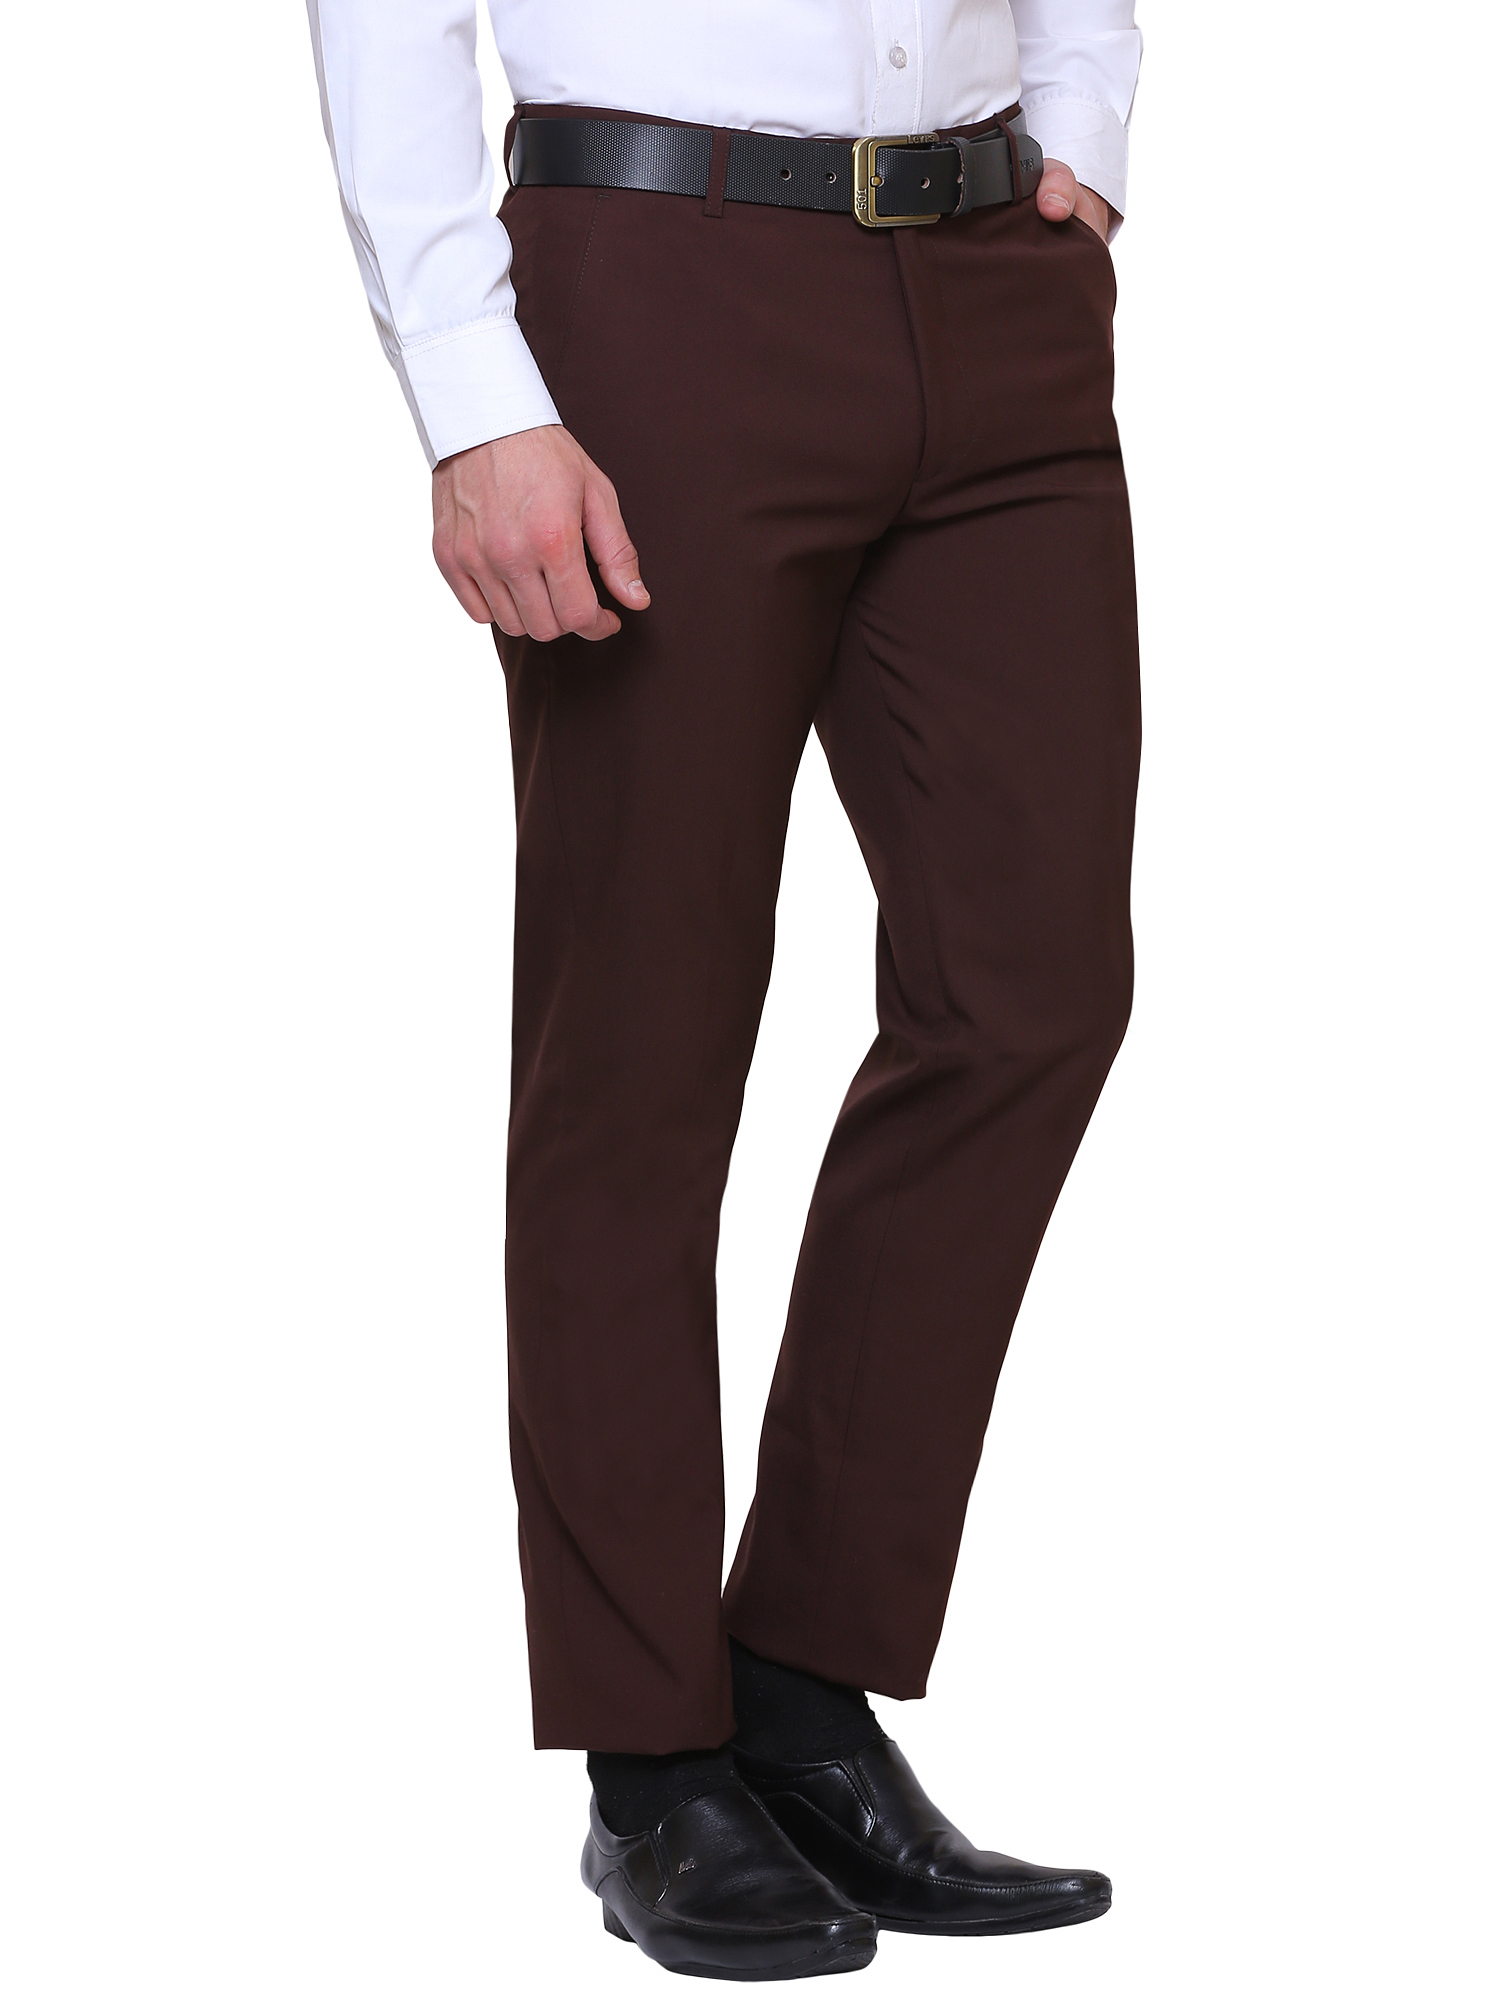 Buy Inspire Coffee Formal Trouser Online @ ₹649 from ShopClues